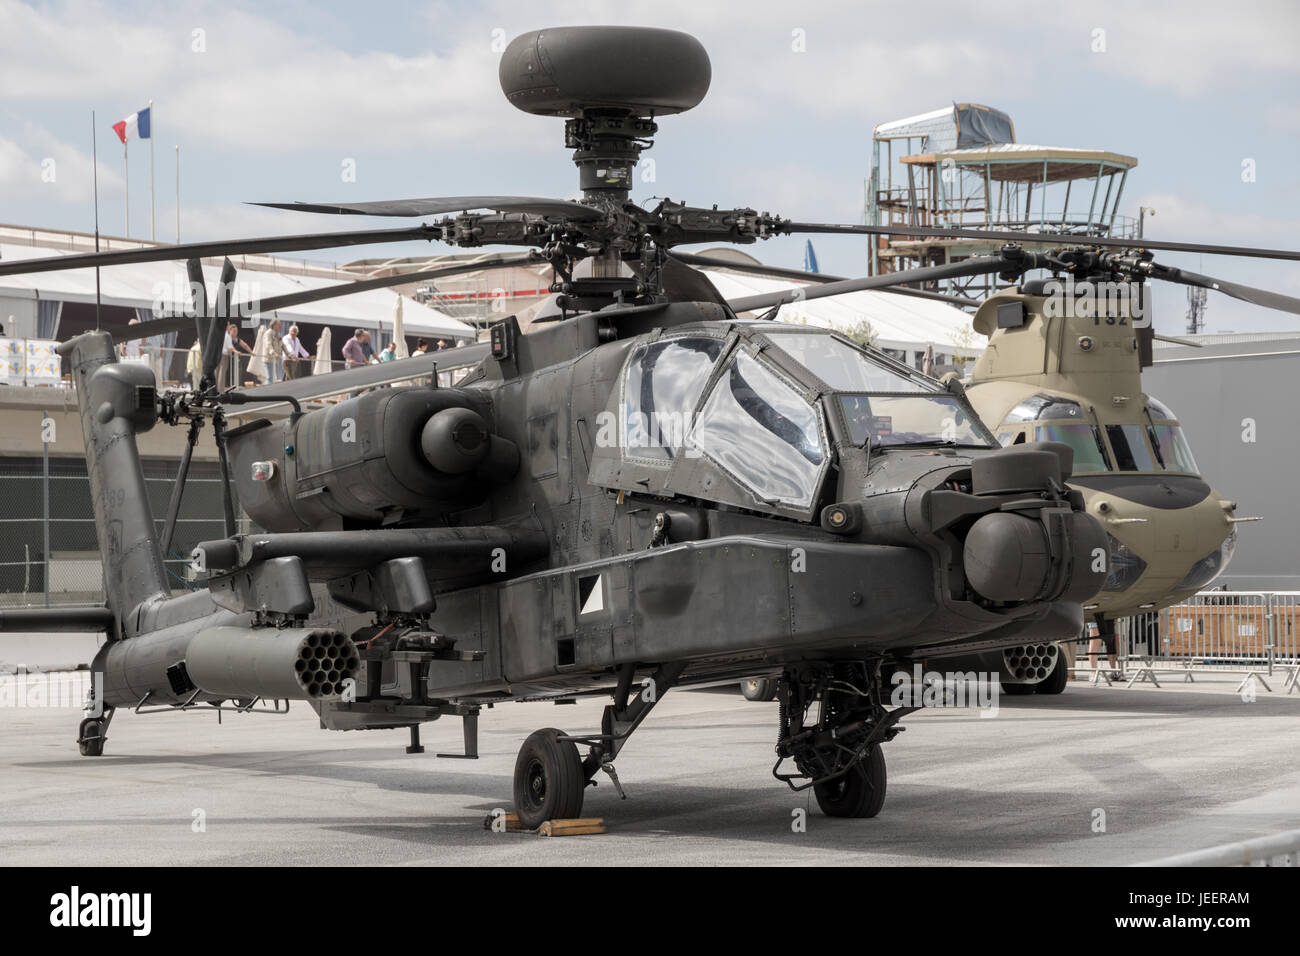 PARIS, FRANCE - JUN 23, 2017: US Army Boeing AH-64 Apache attack helicopter on display at the Paris Air Show 2017 Stock Photo